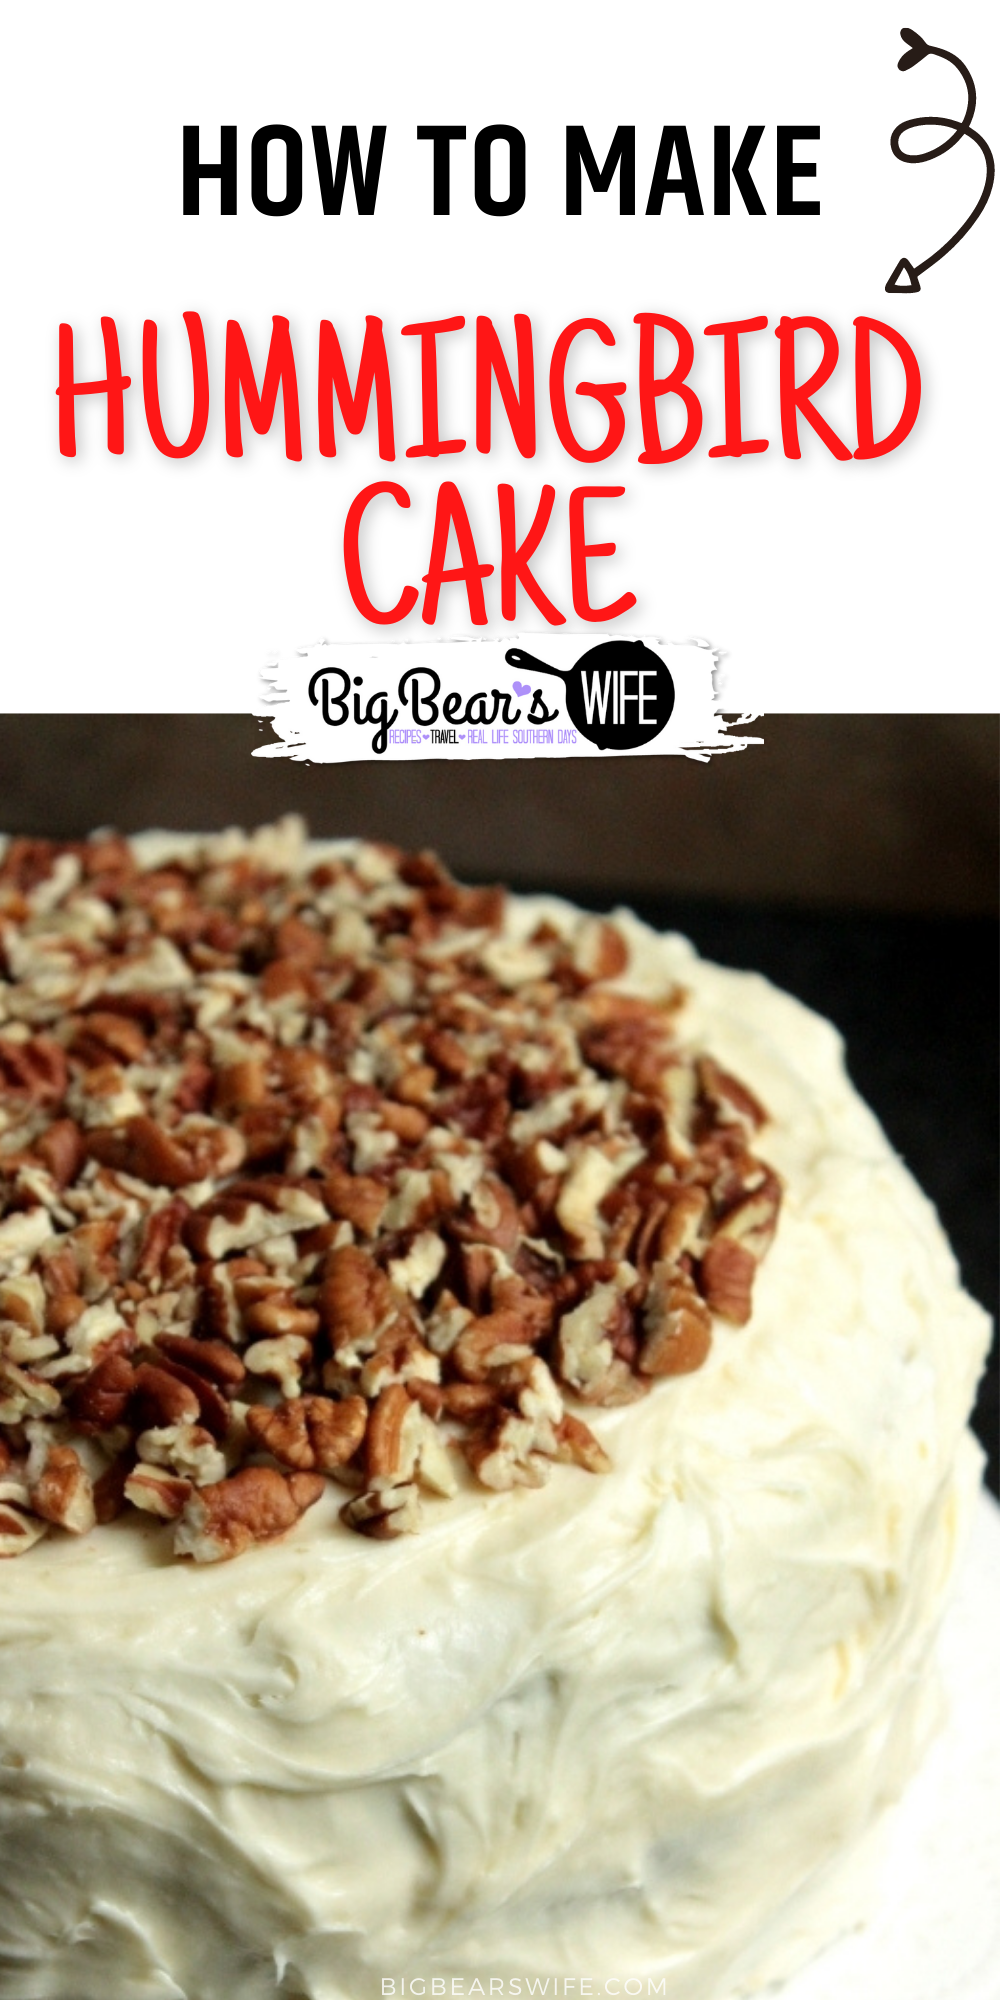  Hummingbird Cake is a spice cake loaded with pineapples, bananas and pecans. It's also layered and frosted with a thick cream cheese icing! via @bigbearswife